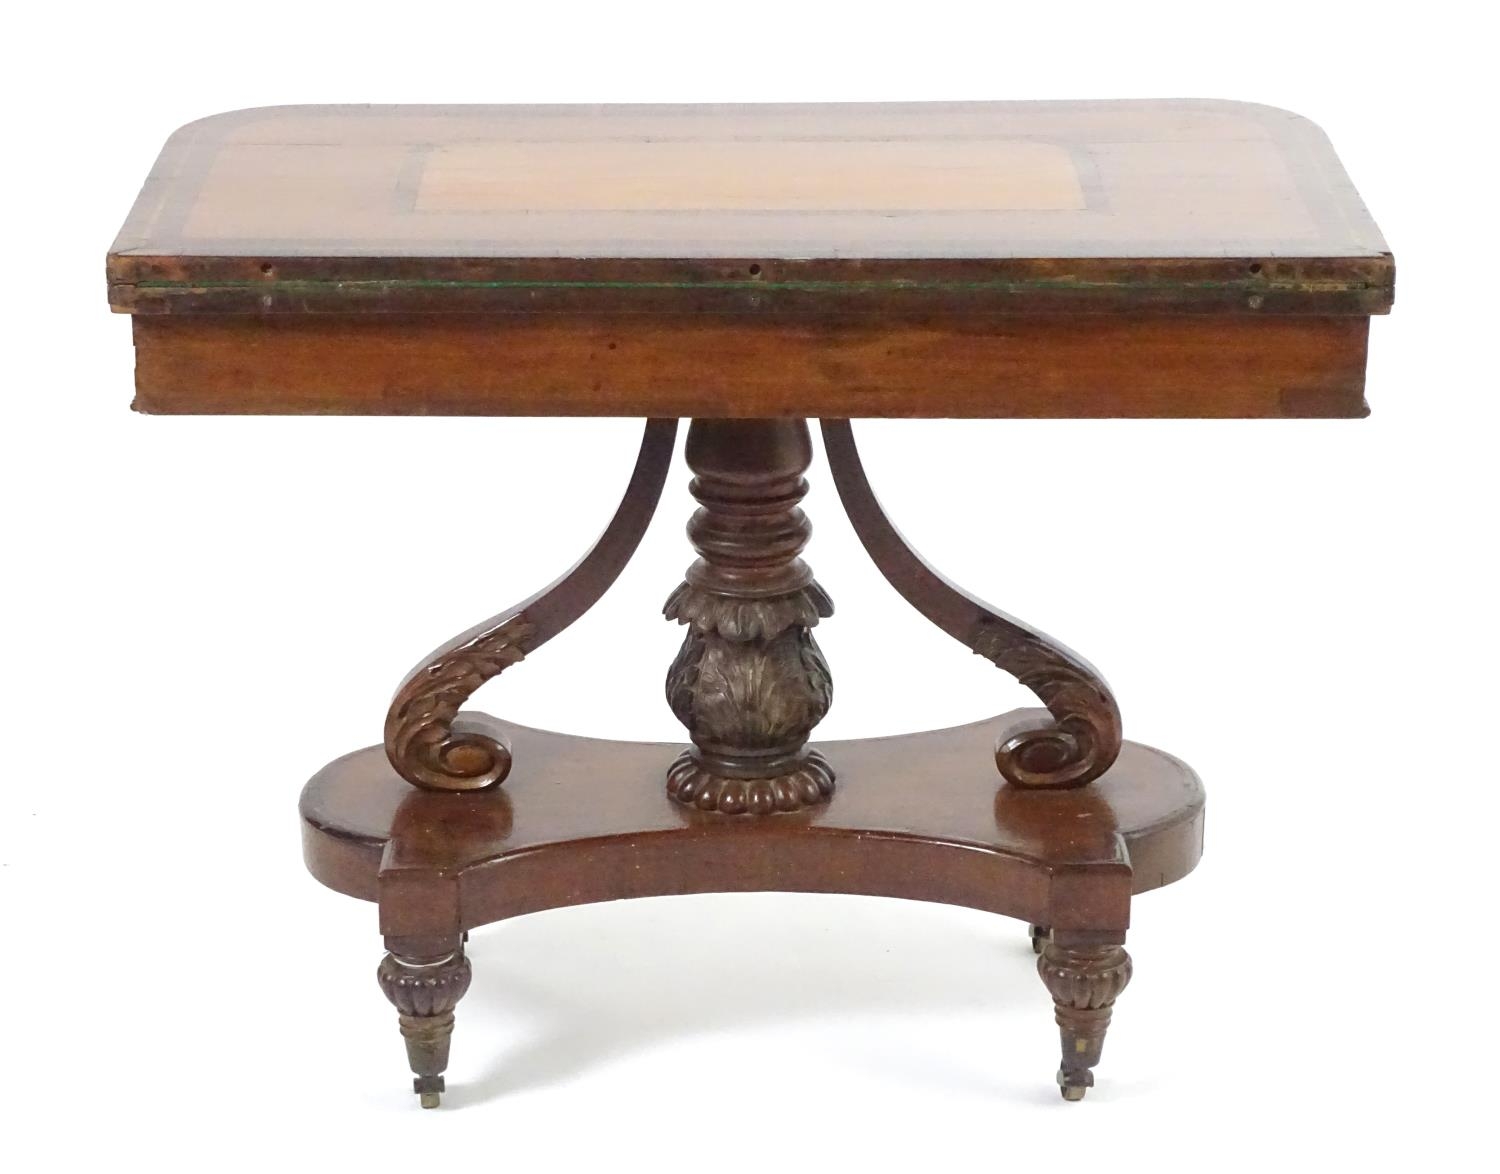 An early / mid 19thc Scottish platform card table with a mahogany and rosewood crossbanded top, - Image 3 of 10